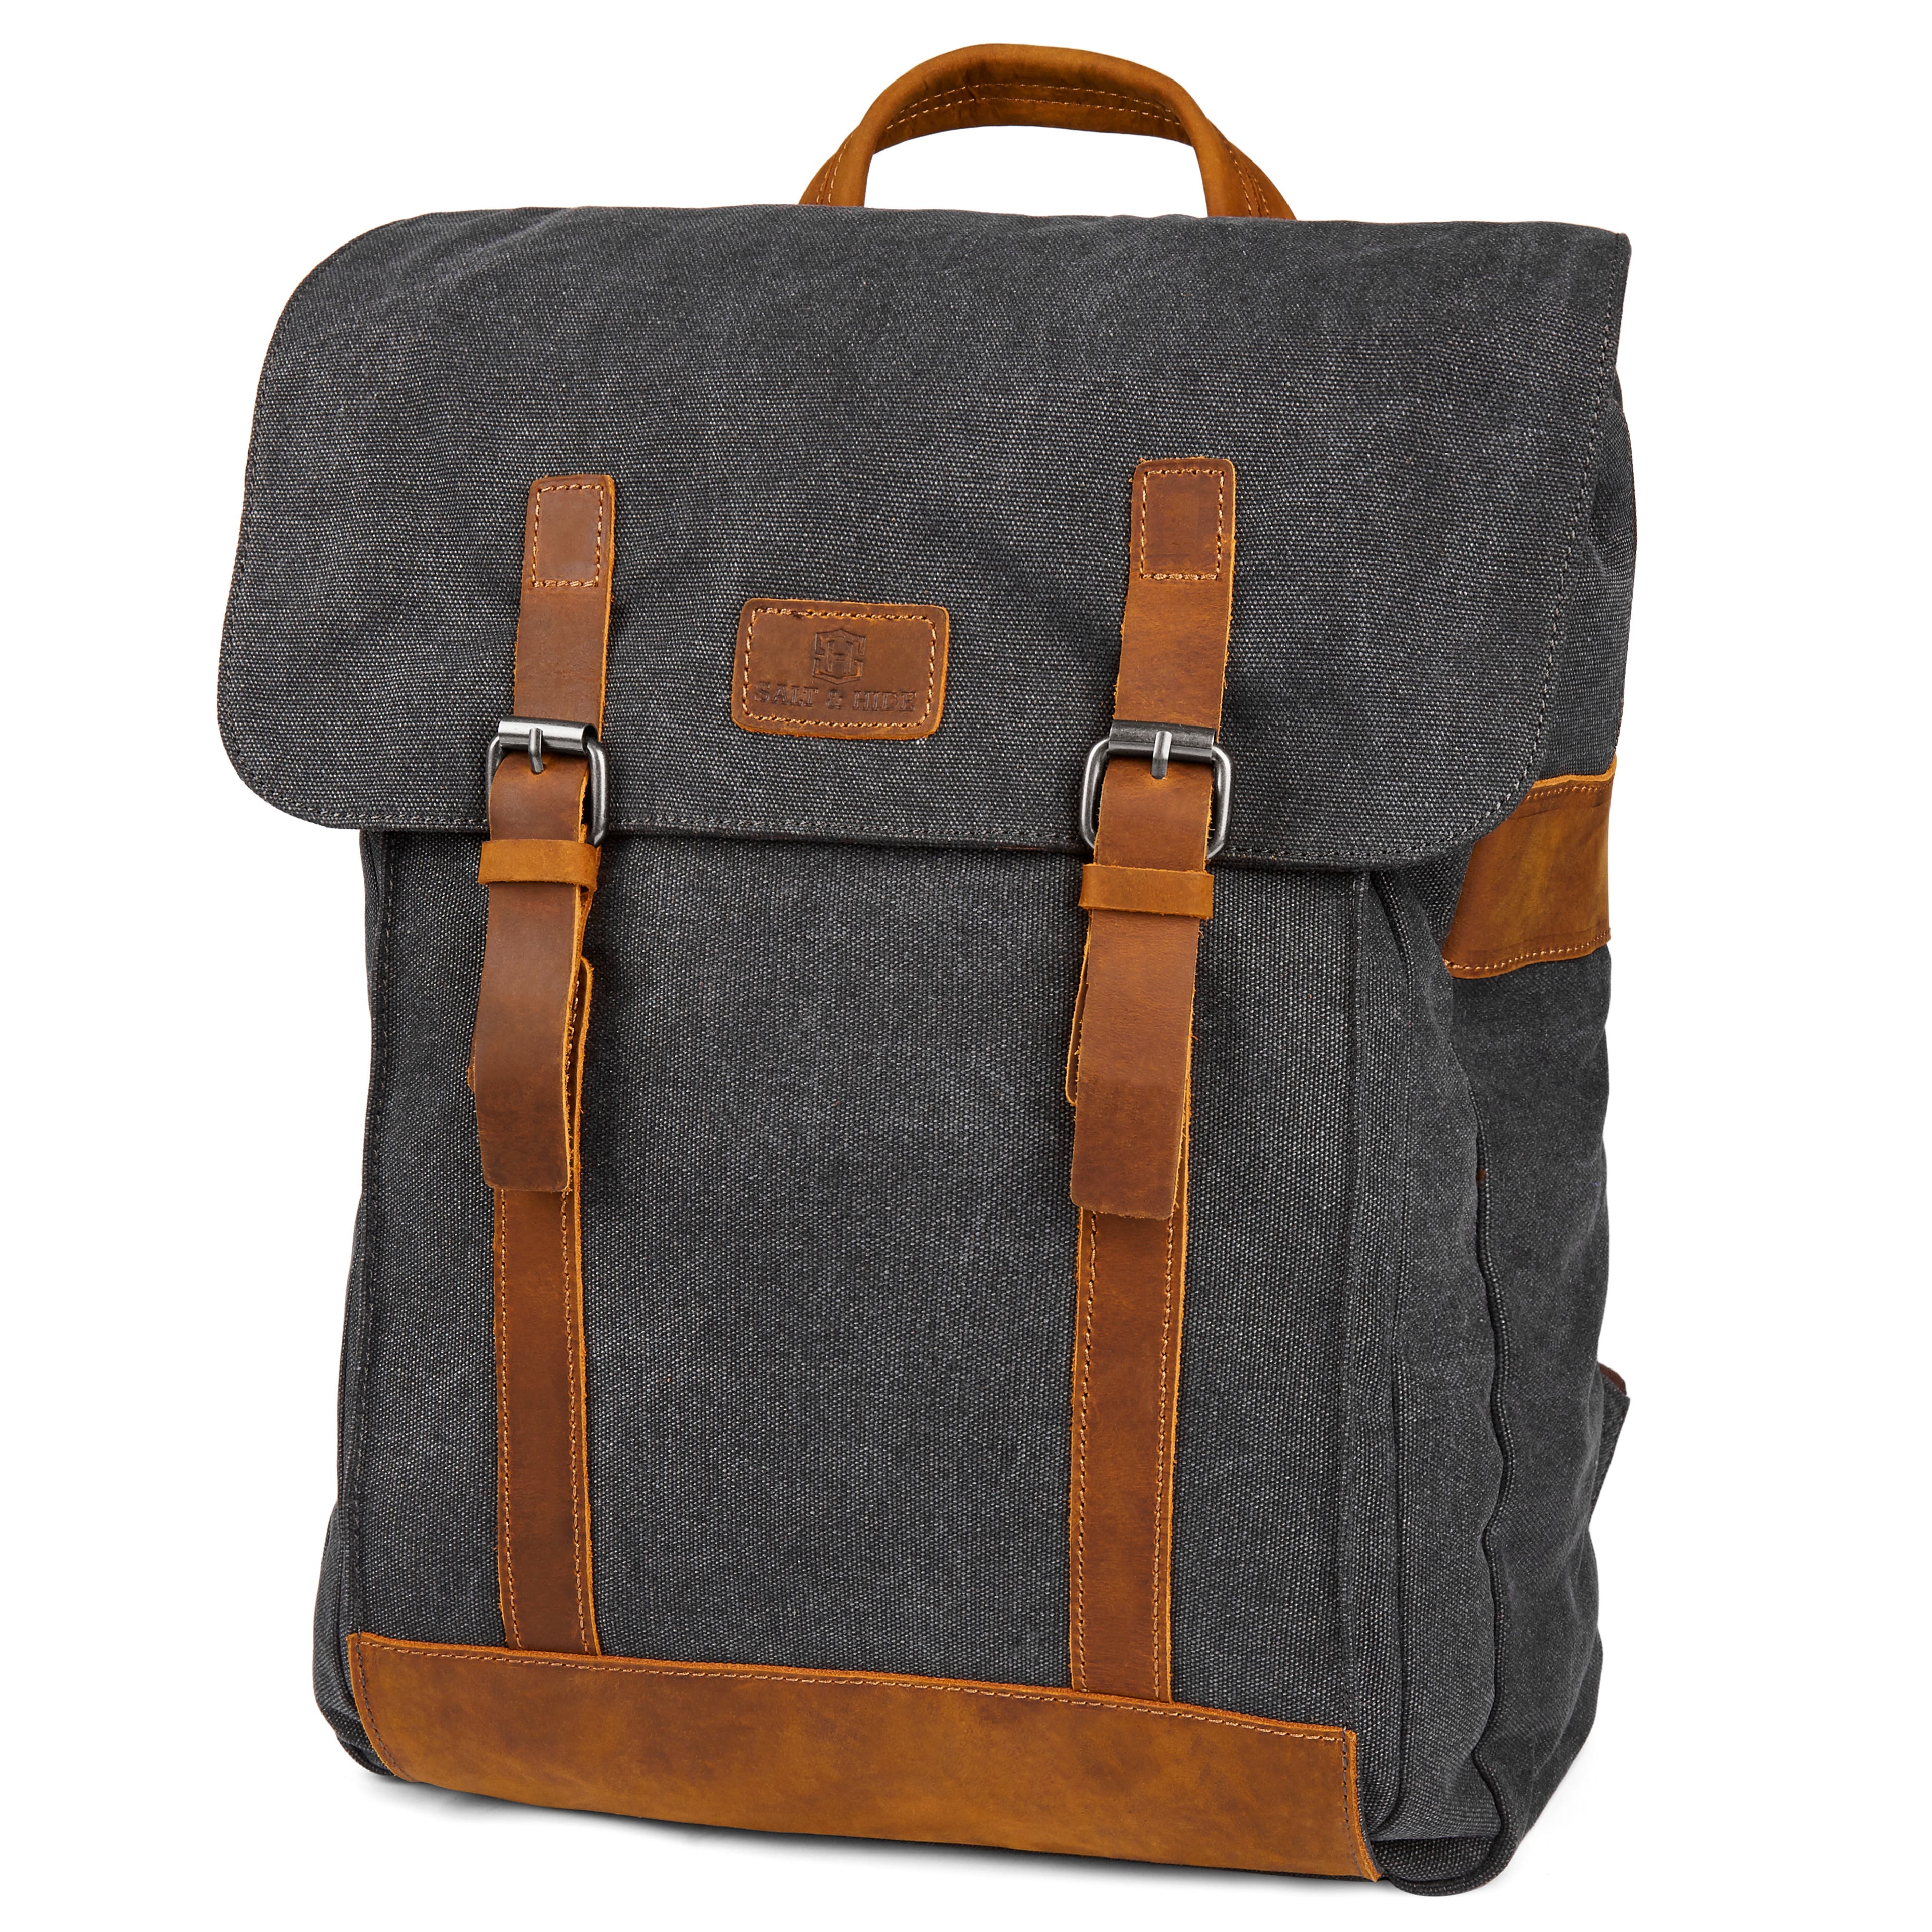 Tarpa | Classic Graphite Canvas & Tan Leather Backpack